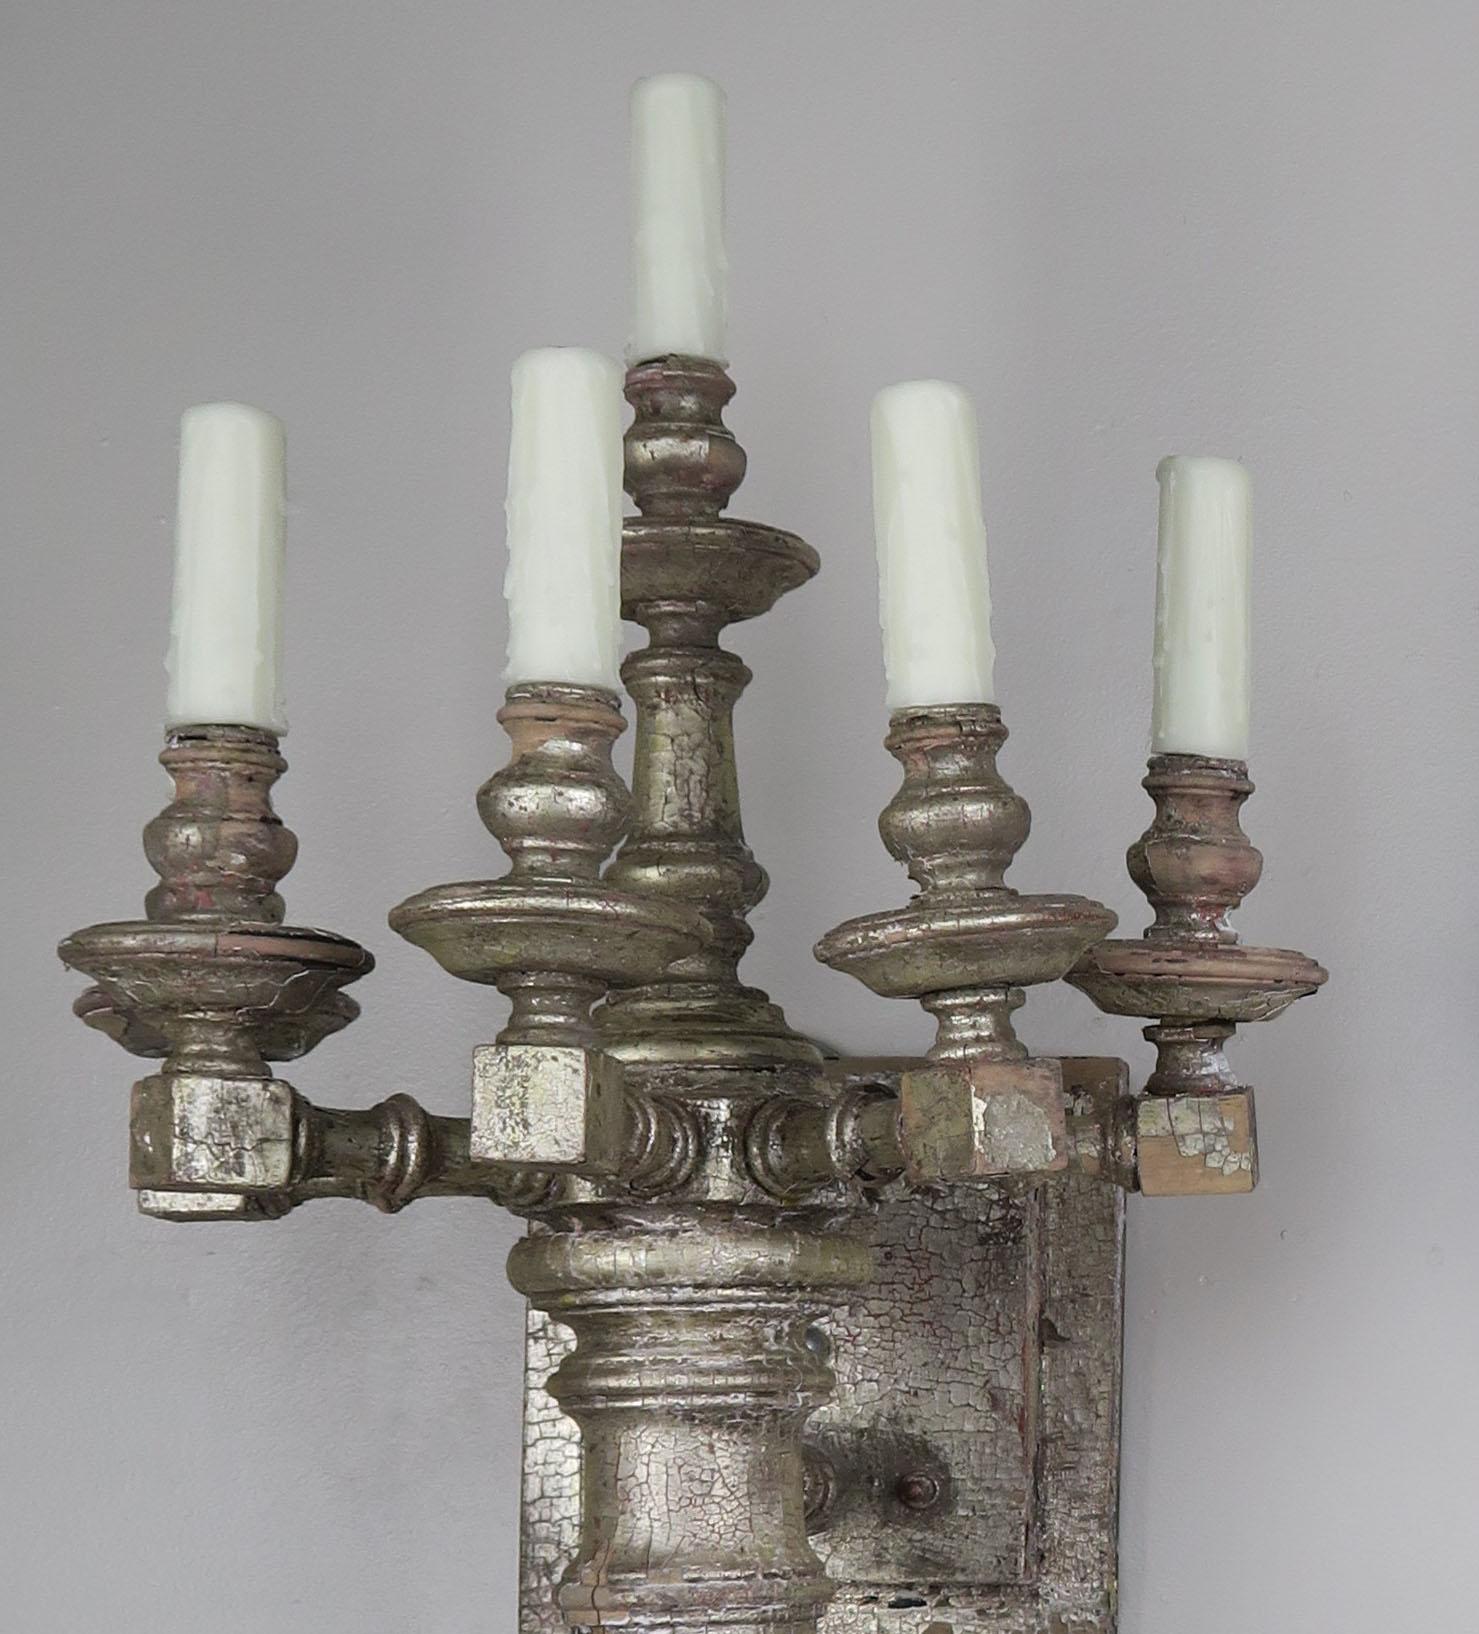 Pair of midcentury Italian bamboo motif 6-light silver gilt sconces that are newly rewired with drip wax candle covers. The silver is worn throughout and the wood can be seen underneath in areas.